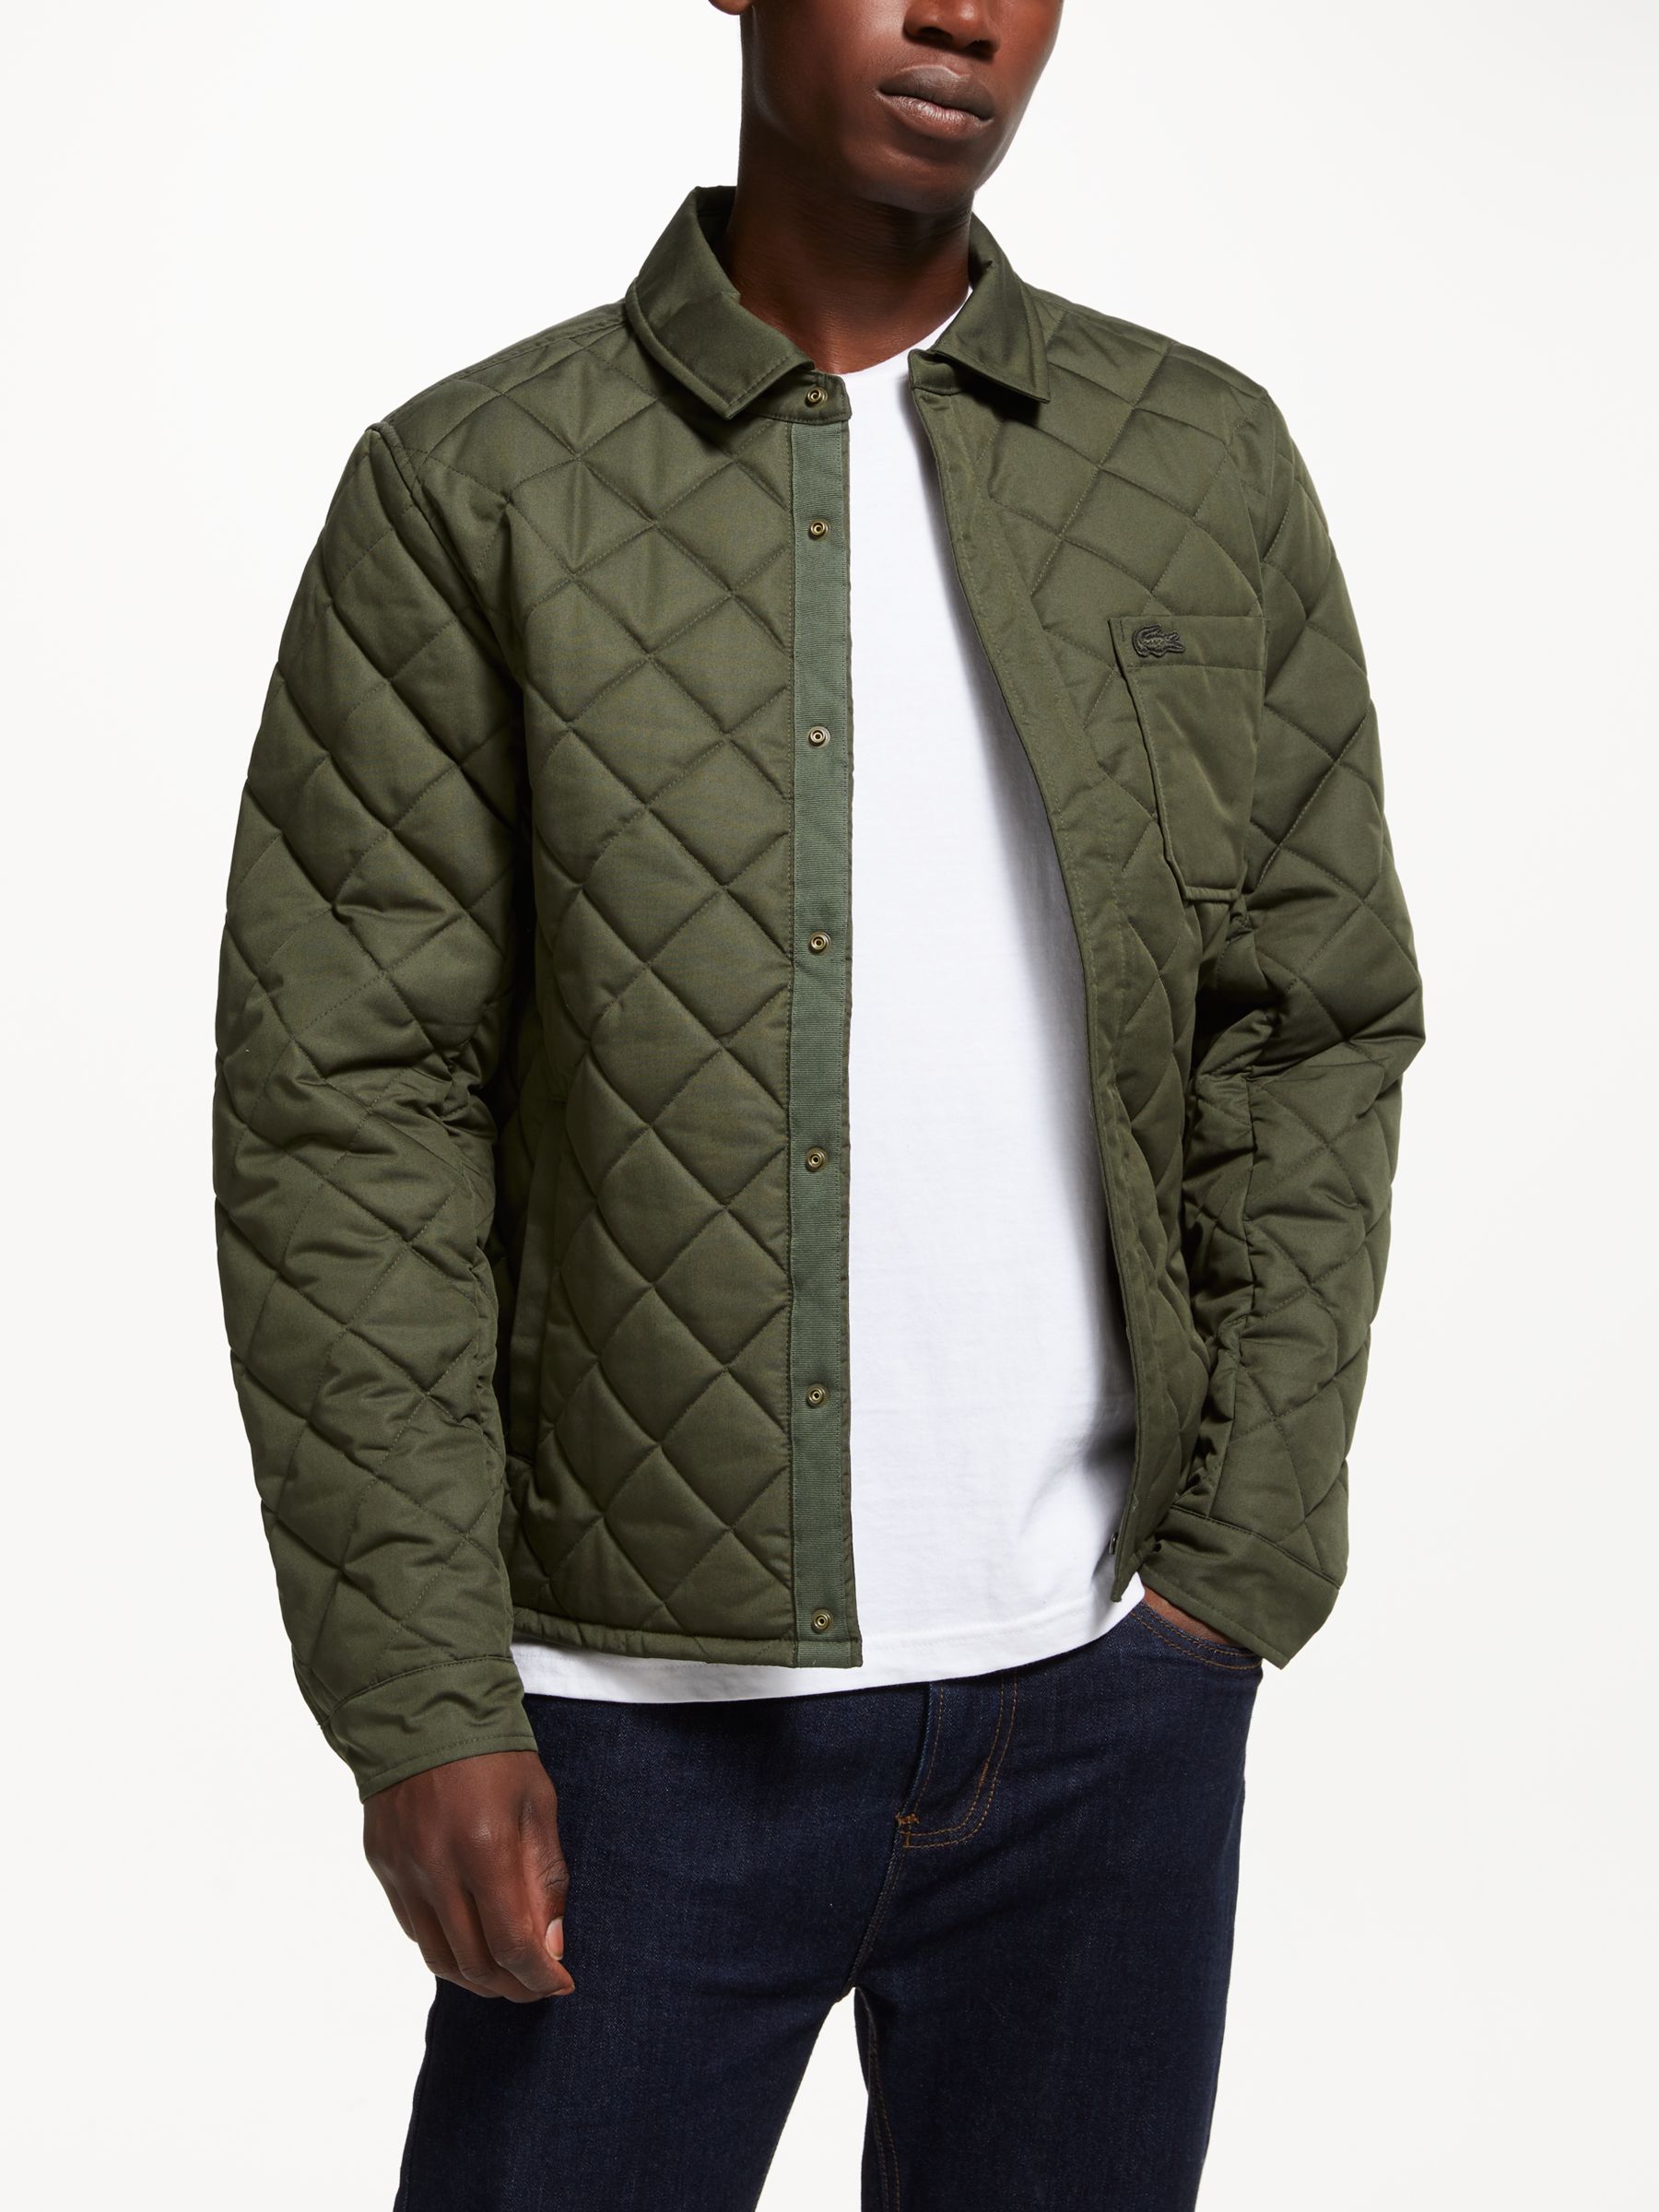 Lacoste Quilted Jacket, Green at John Lewis & Partners